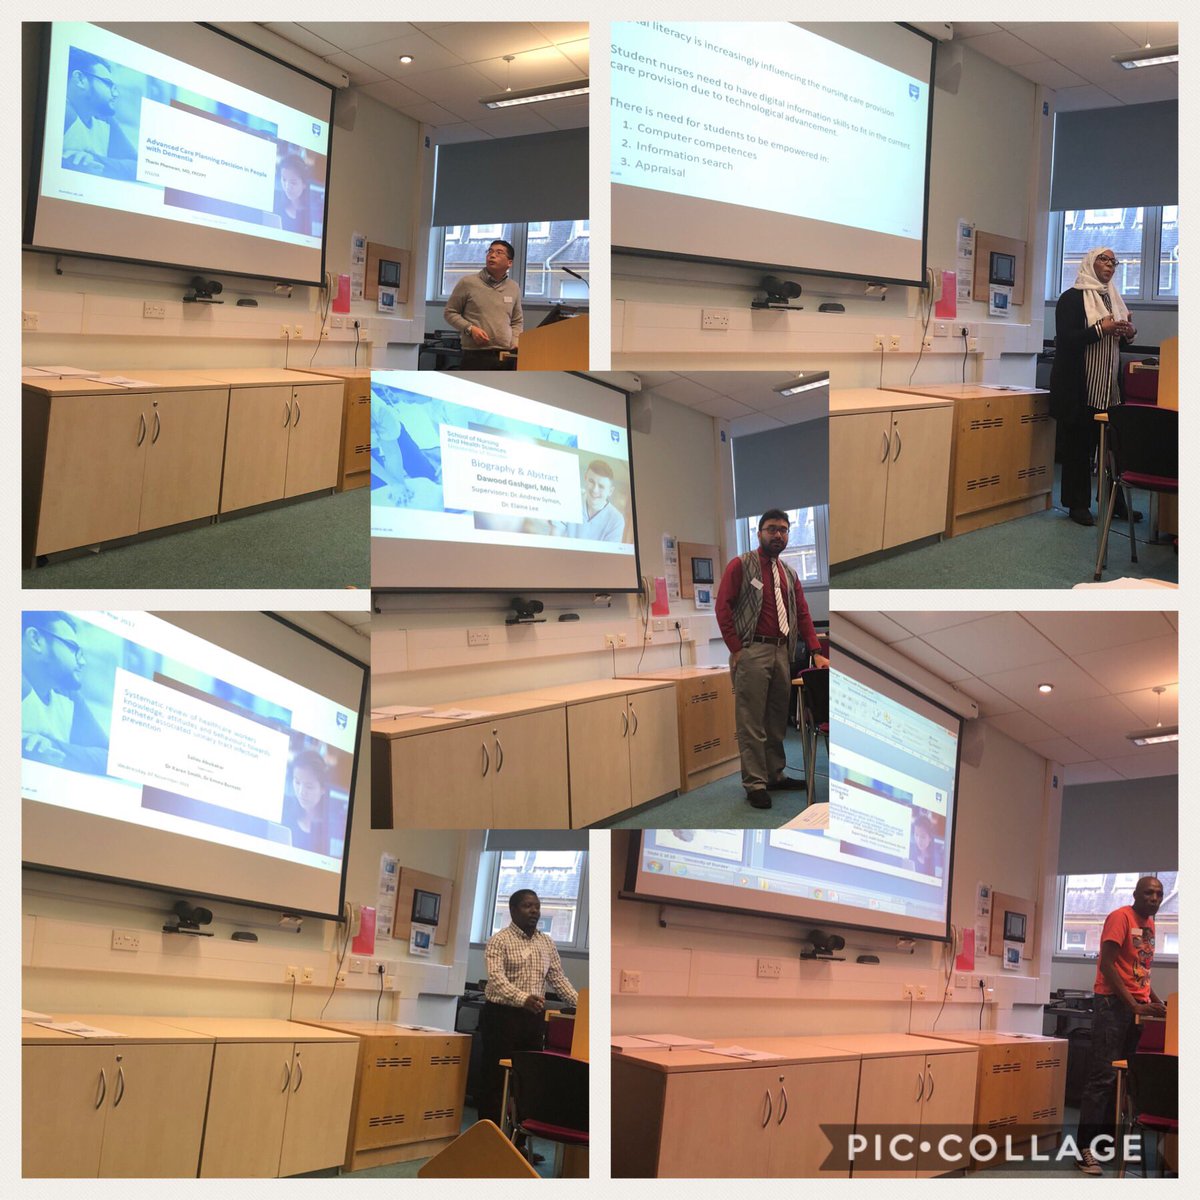 Great to hear about the research work of some of our international PhD students this morning @UoDNHS  #PhDConf2018 #digitalliteracy #infectionprevention #dementia #minoritygroups #HIV #international